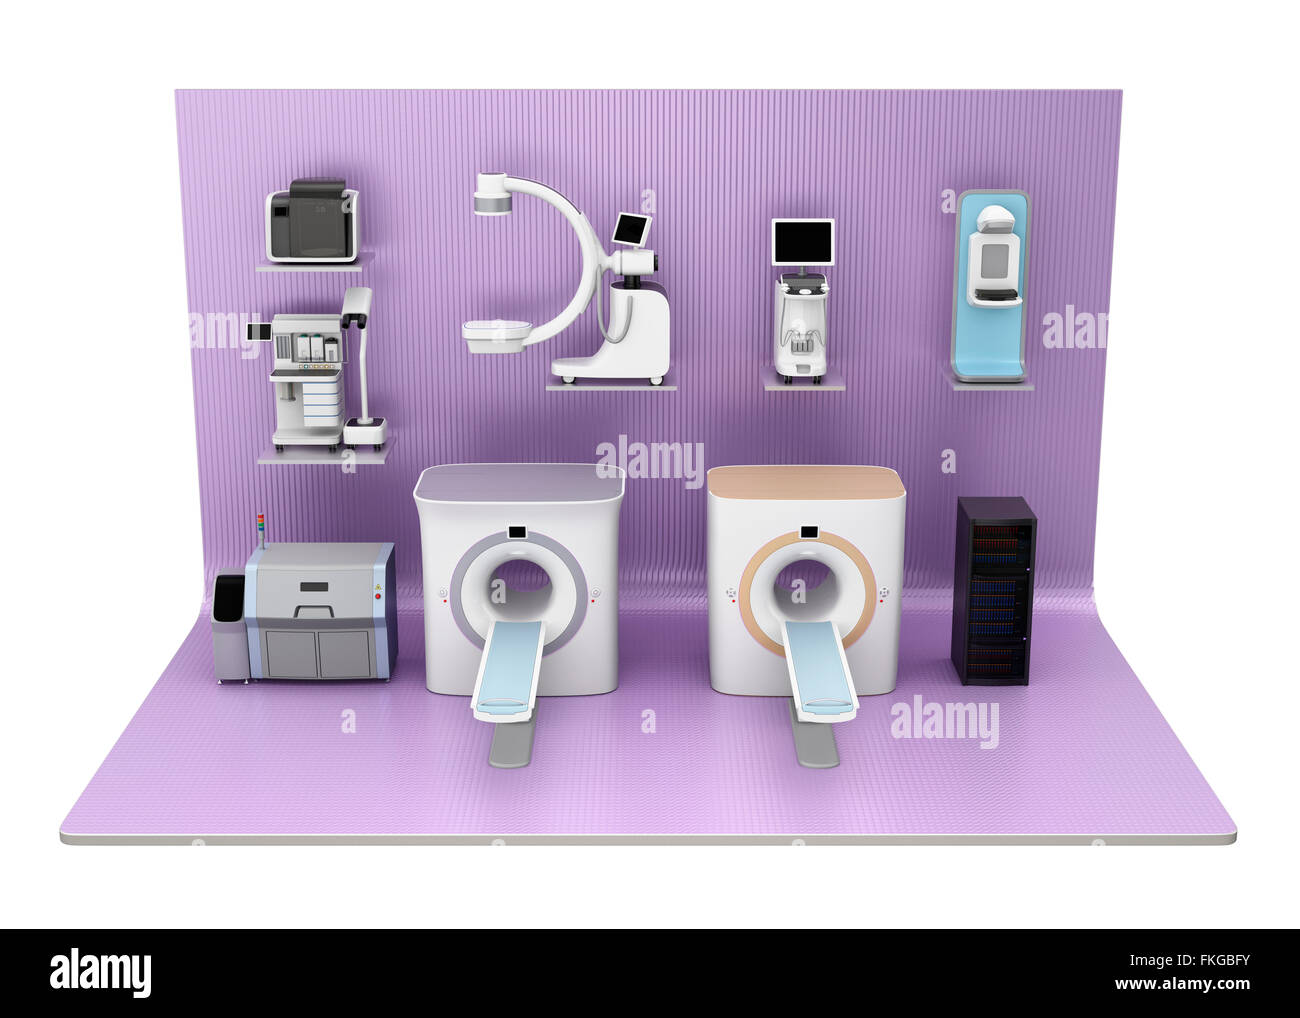 Medical imaging system on exhibition stage. Concept for medical digital workflow solution Stock Photo